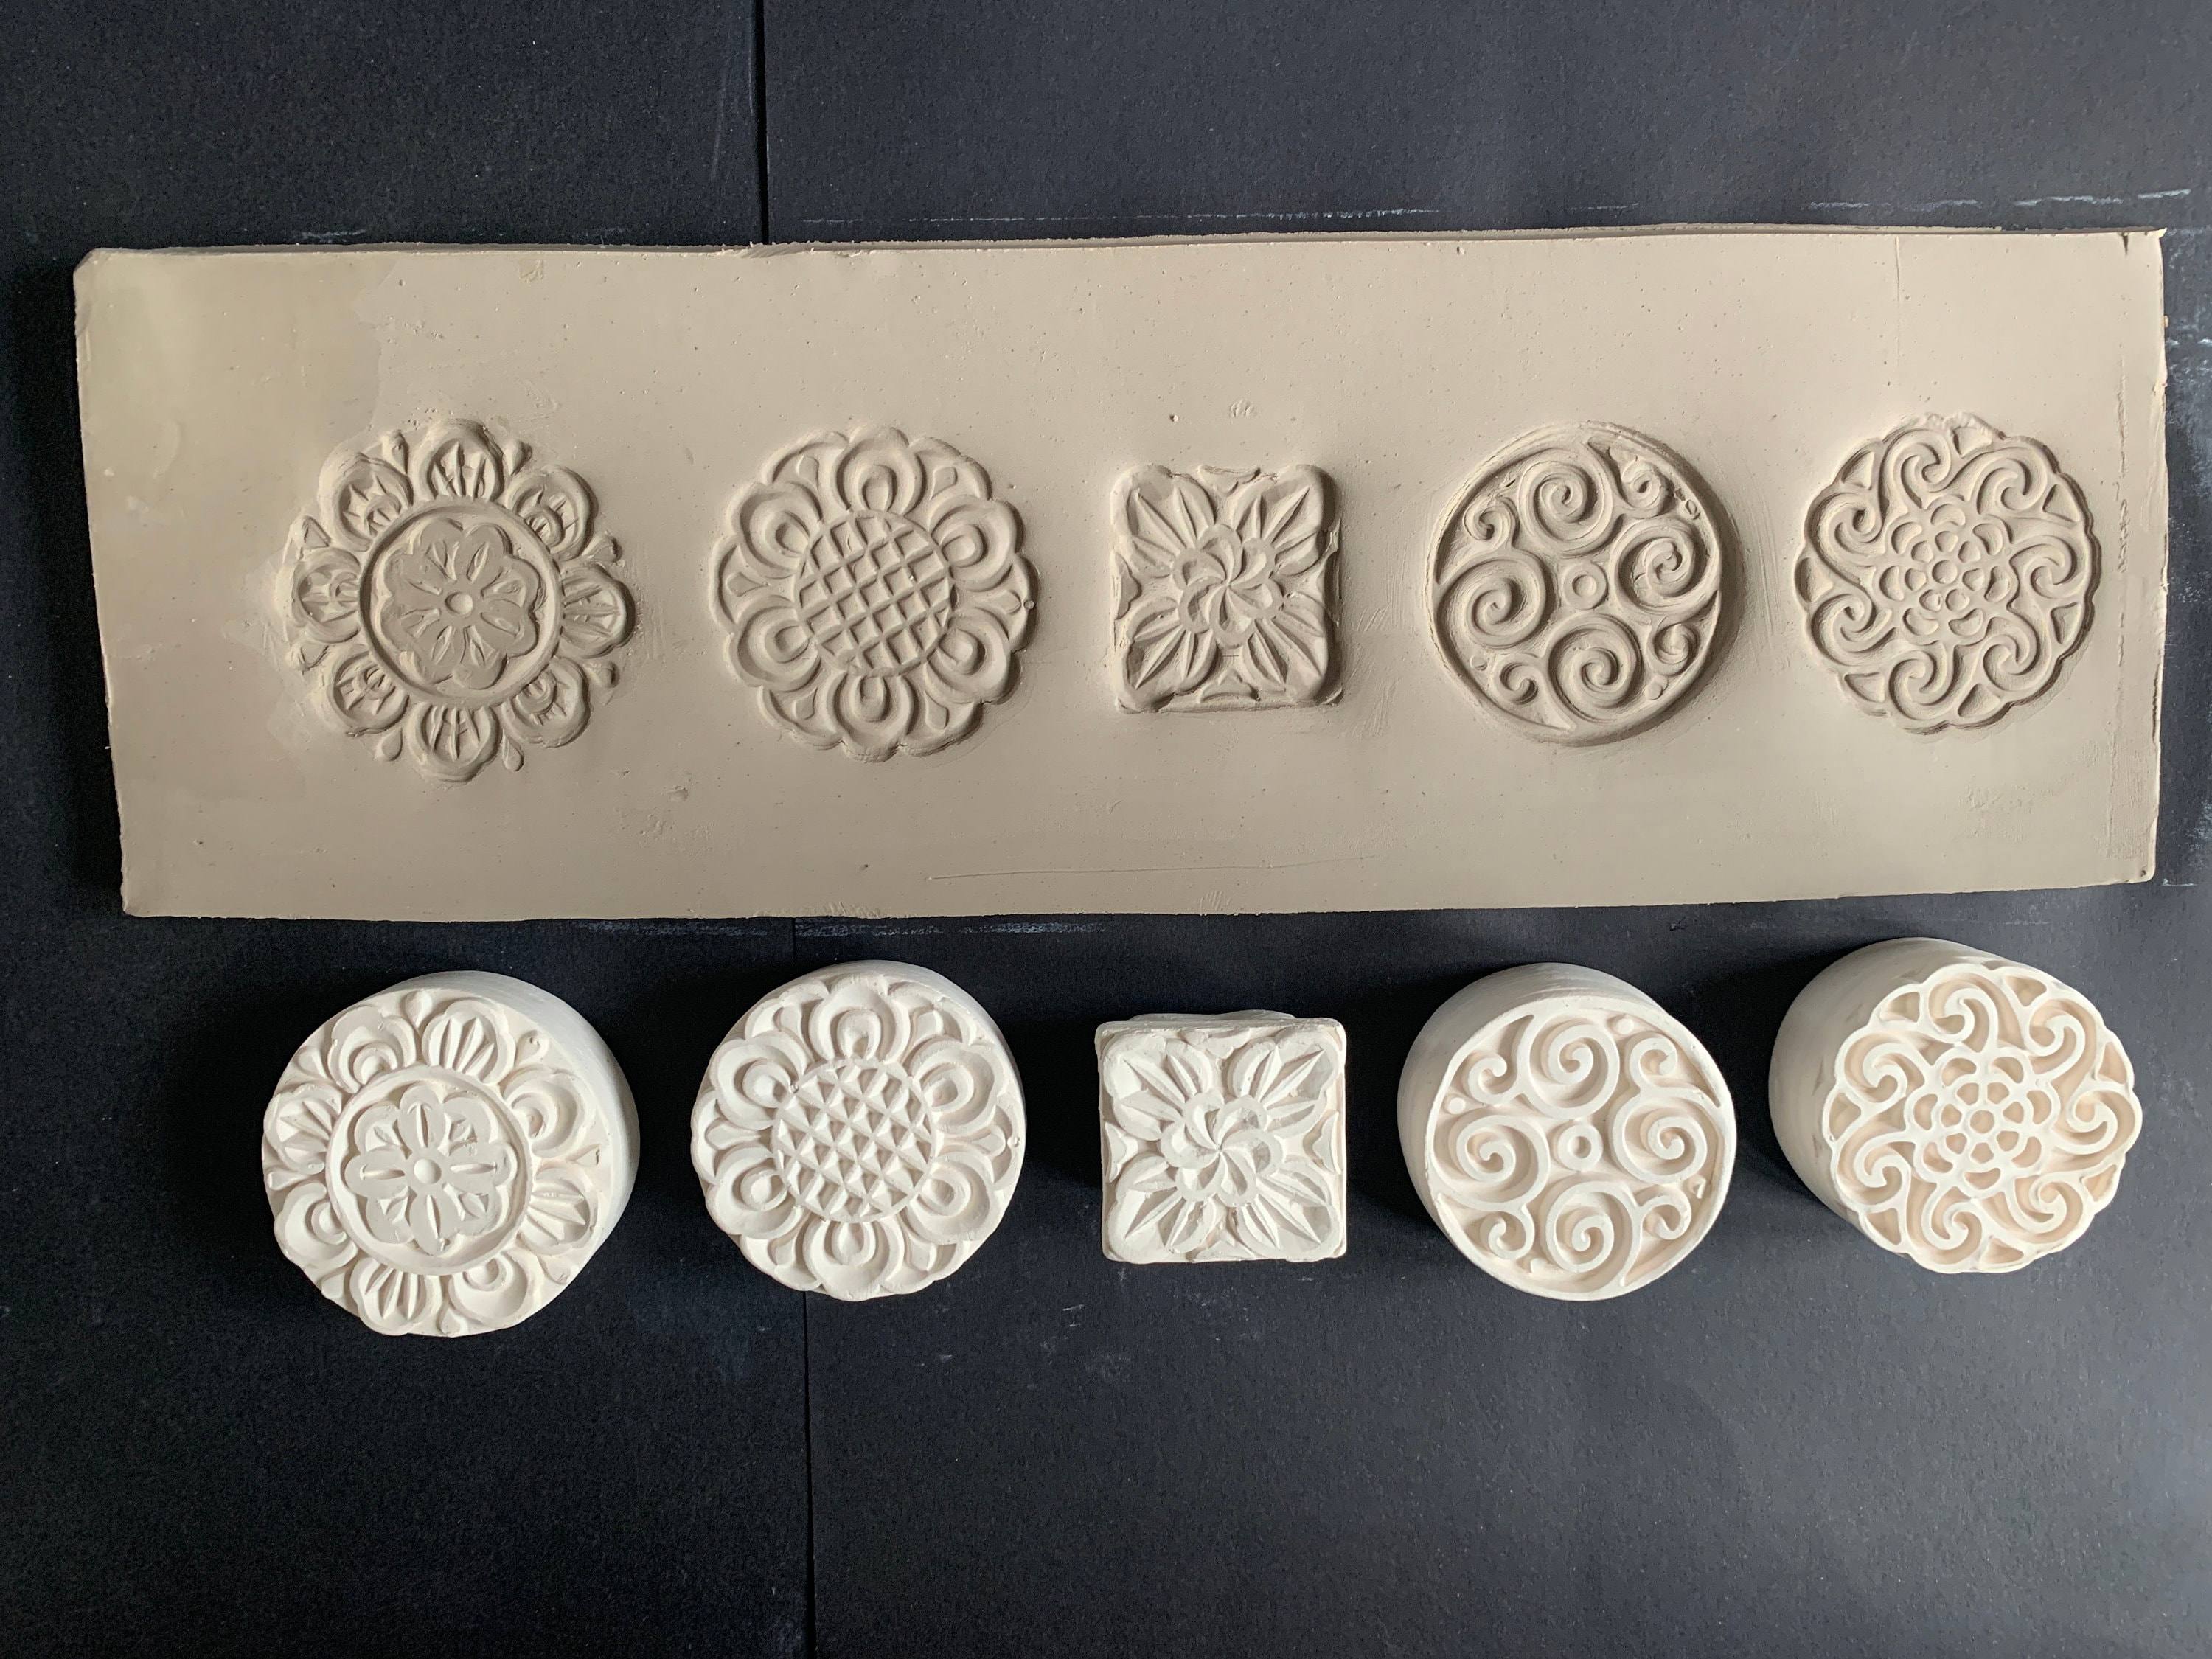 15 Pottery Stamps, Handmade Bisque Stamps, Ceramic Clay Stamps, Polymer Clay  Pottery Stamps Set A Ready to Ship 